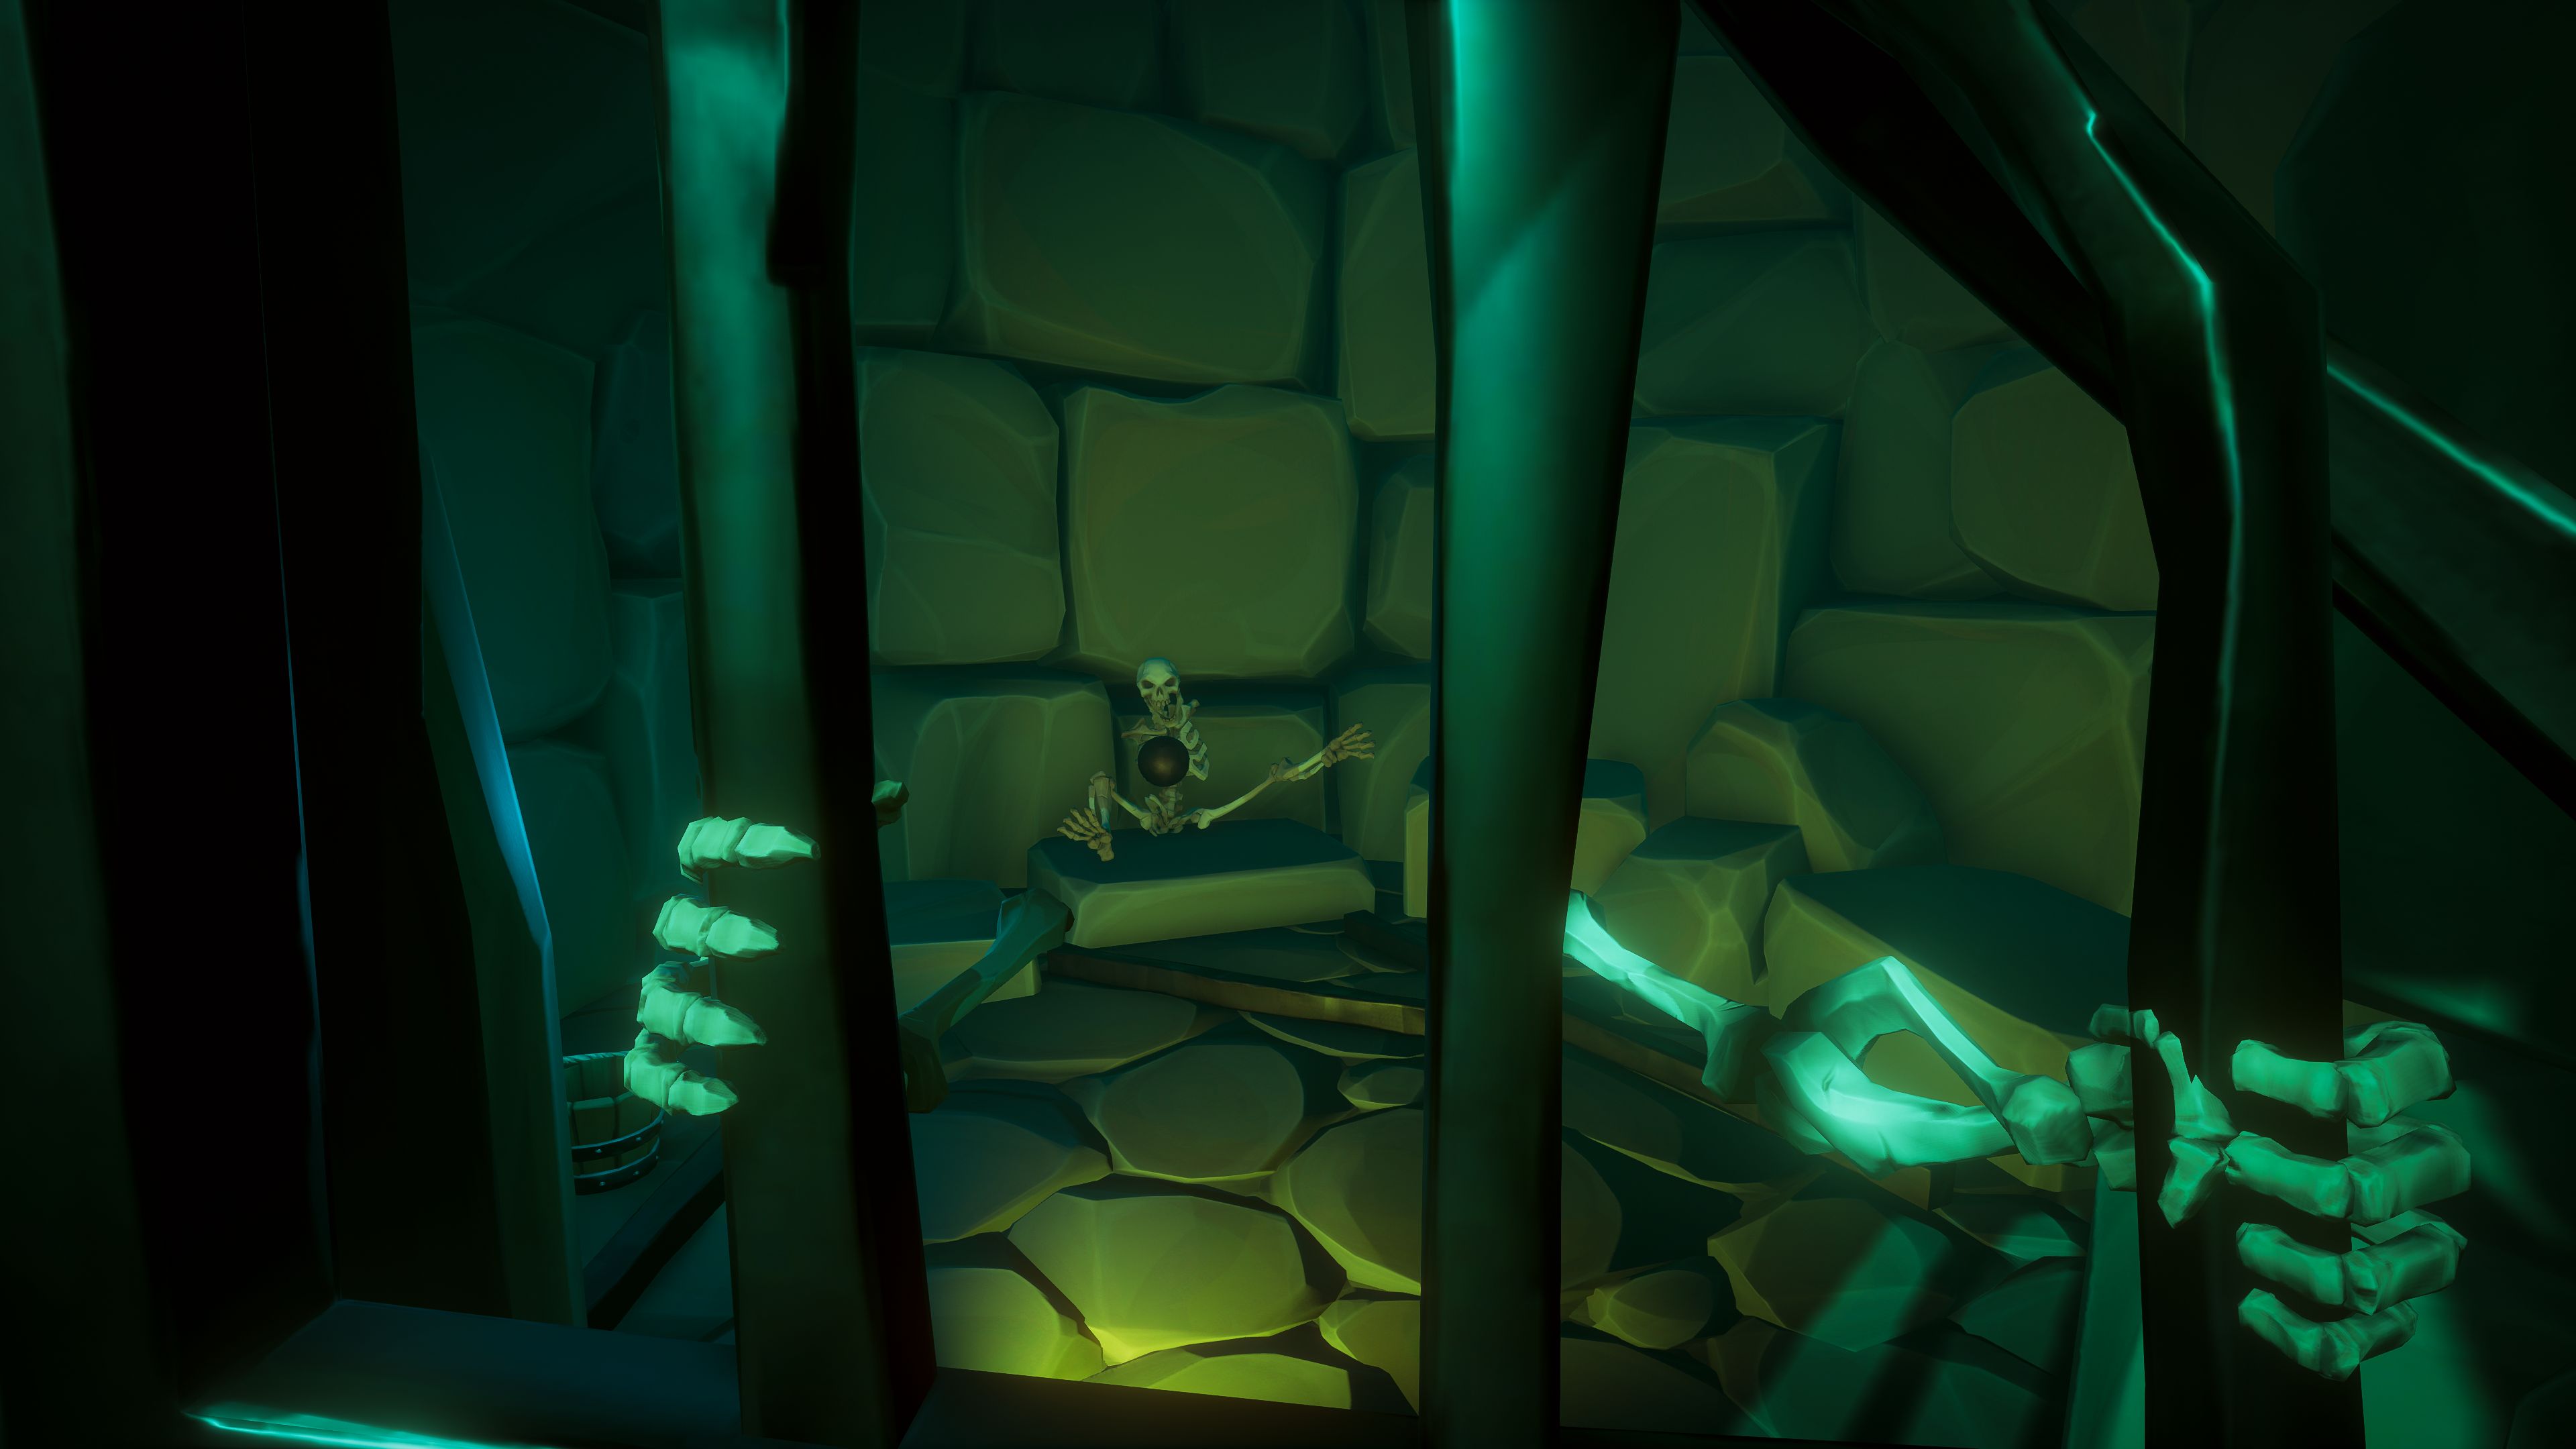 Faktura Tanke Broderskab Sea of Thieves on Twitter: "Have a good weekend, pirates! Hopefully you  have more luck than this fella... https://t.co/Hvkw3CV3NI" / Twitter